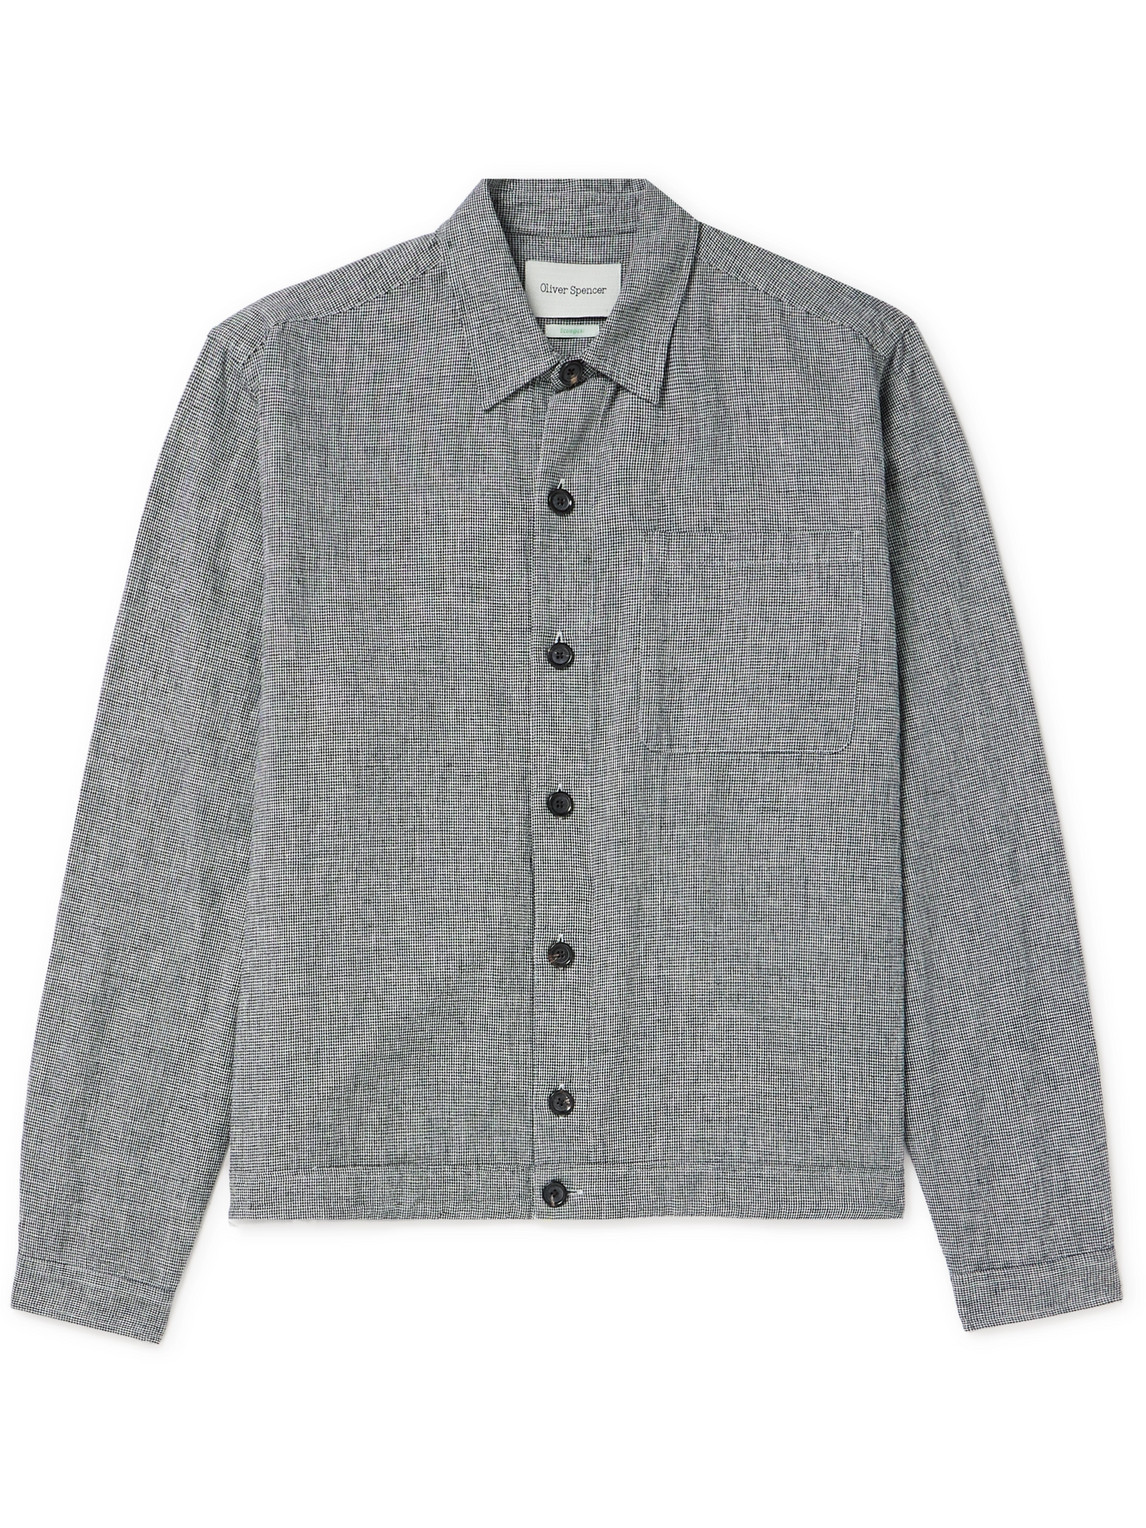 Milford Houndstooth Cotton and Linen-Blend Jacket